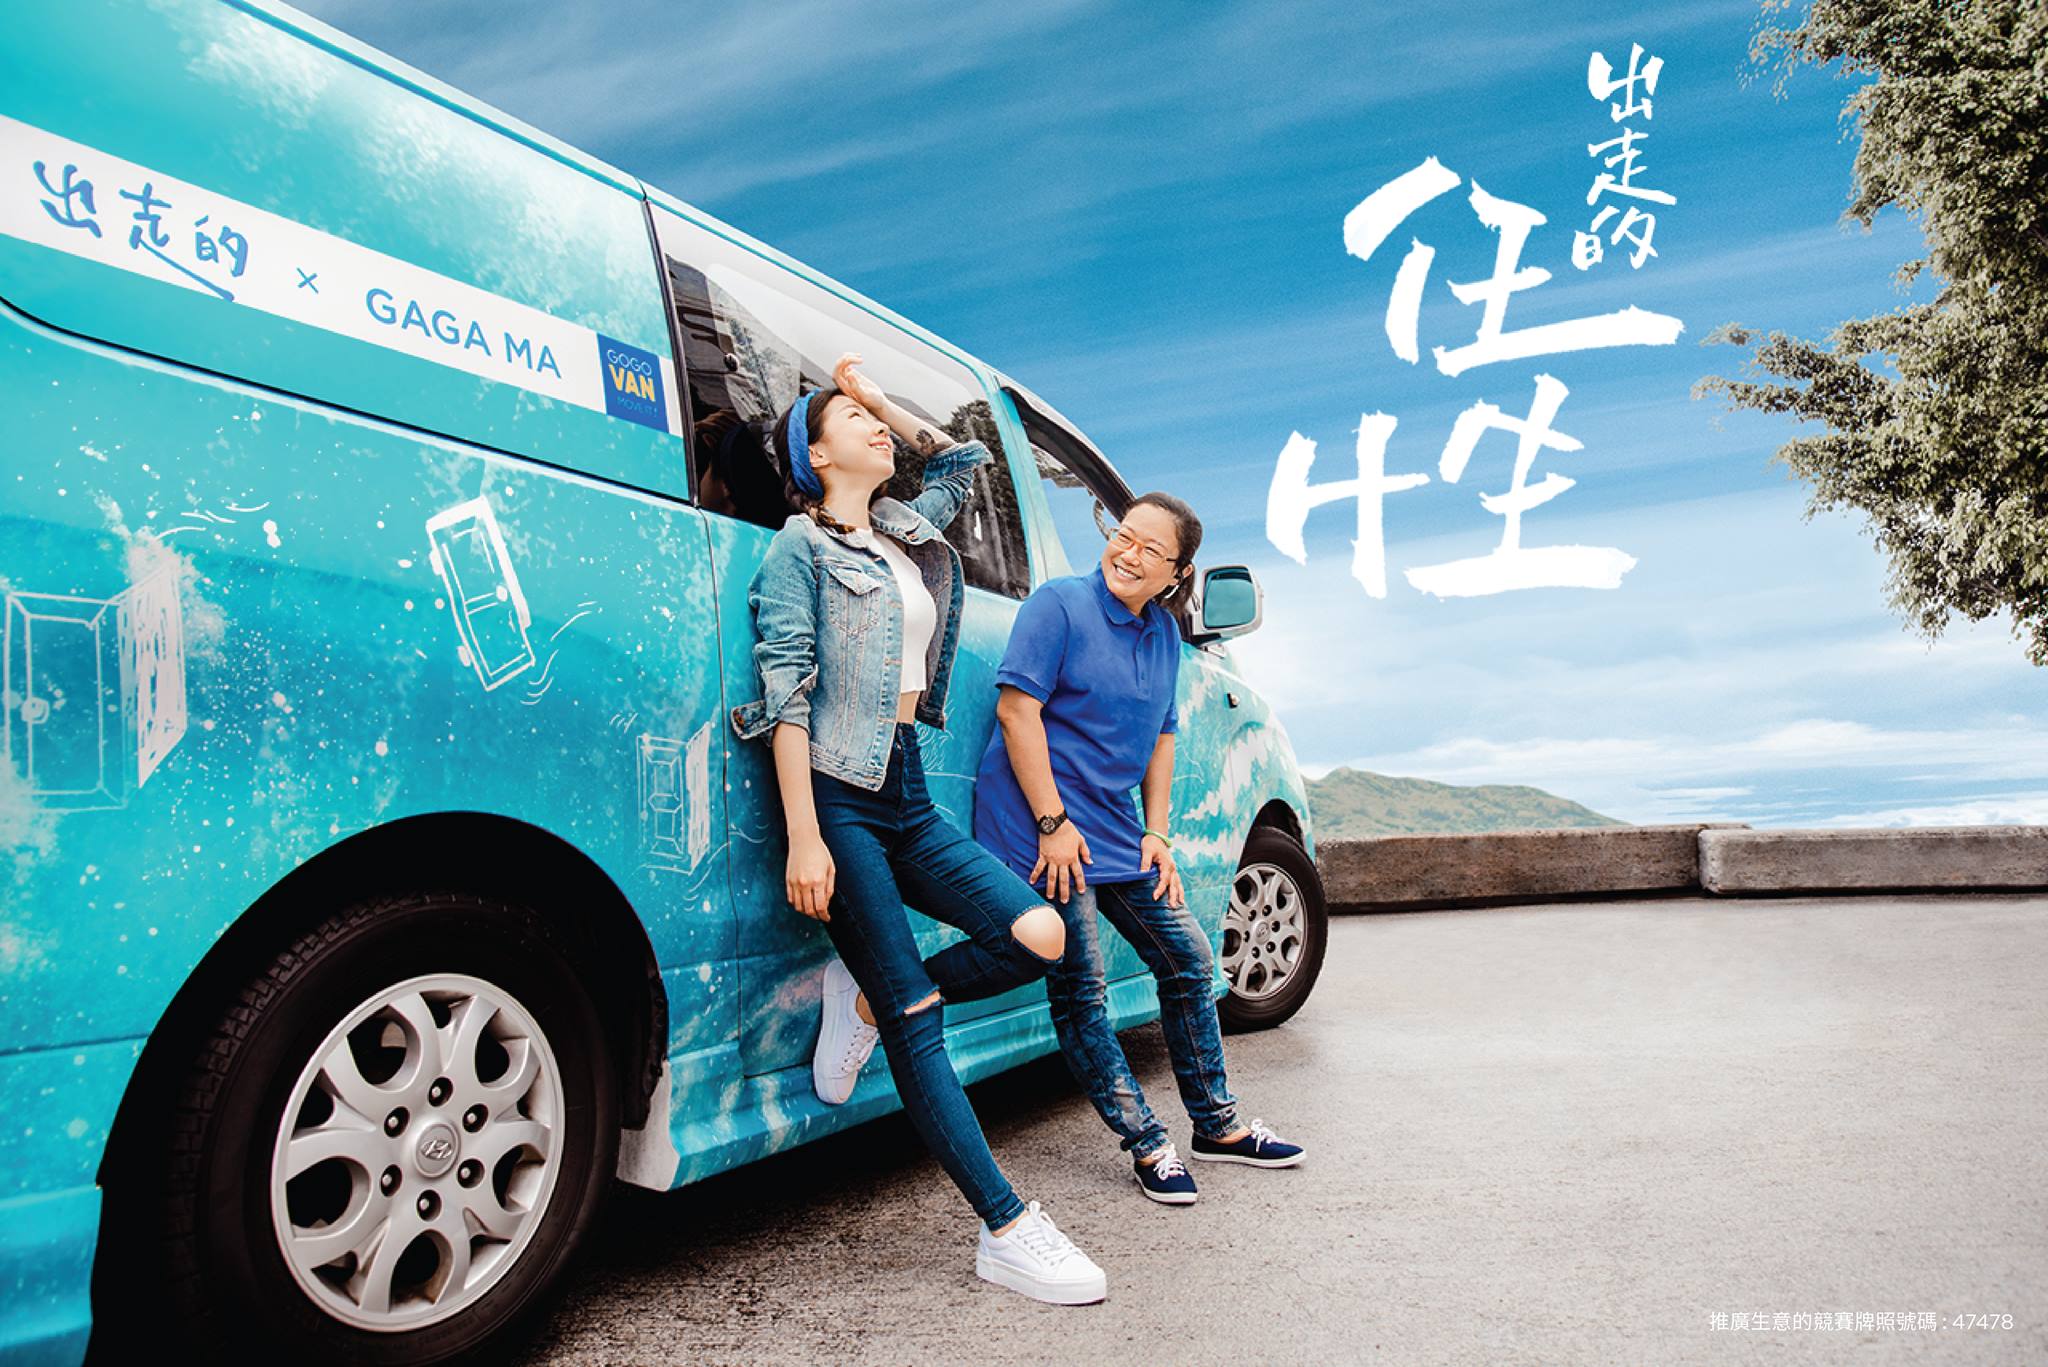 GoGoVan's campaign "Escape" is painting our city's vans in beautiful colors. PHOTO: GoGoVan 